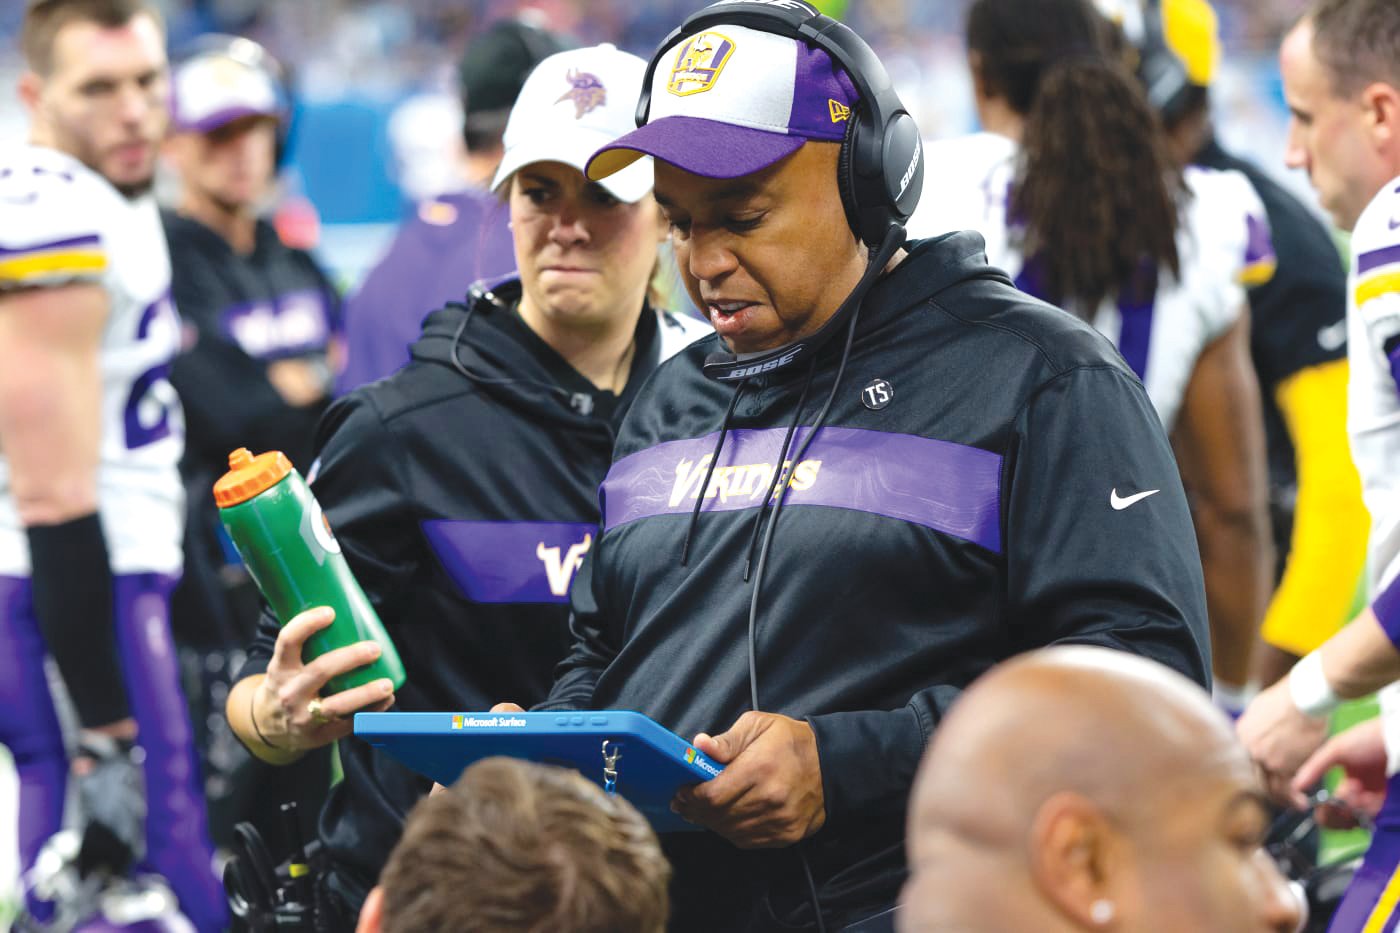 Siler City native George Edwards (center) will not be back as Defensive Coordinator for the Minnesota Vikings after six years with the NFL franchise. Edwards, a 22-year coaching veteran of the league, is rumored to be in contention for the same position with the Cleveland Browns.